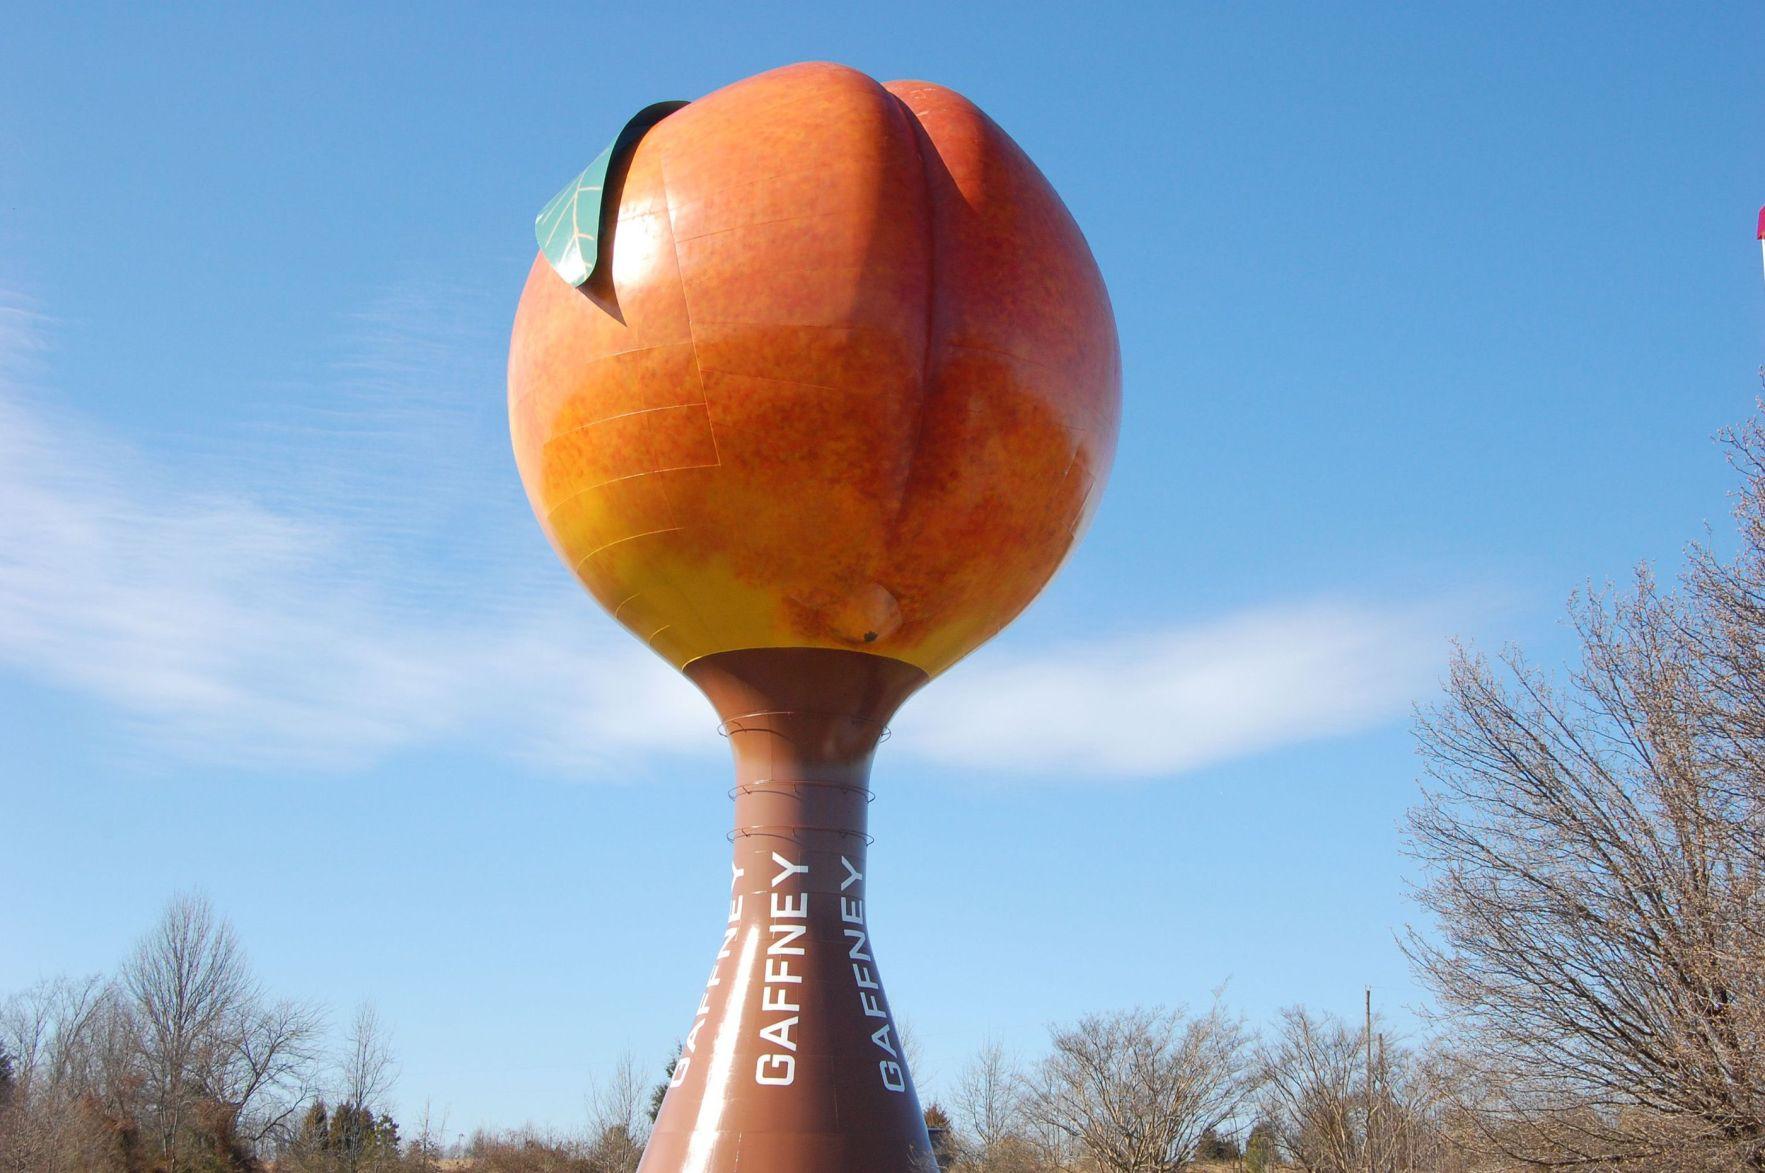 Fence put up around famous South Carolina peach water tower News